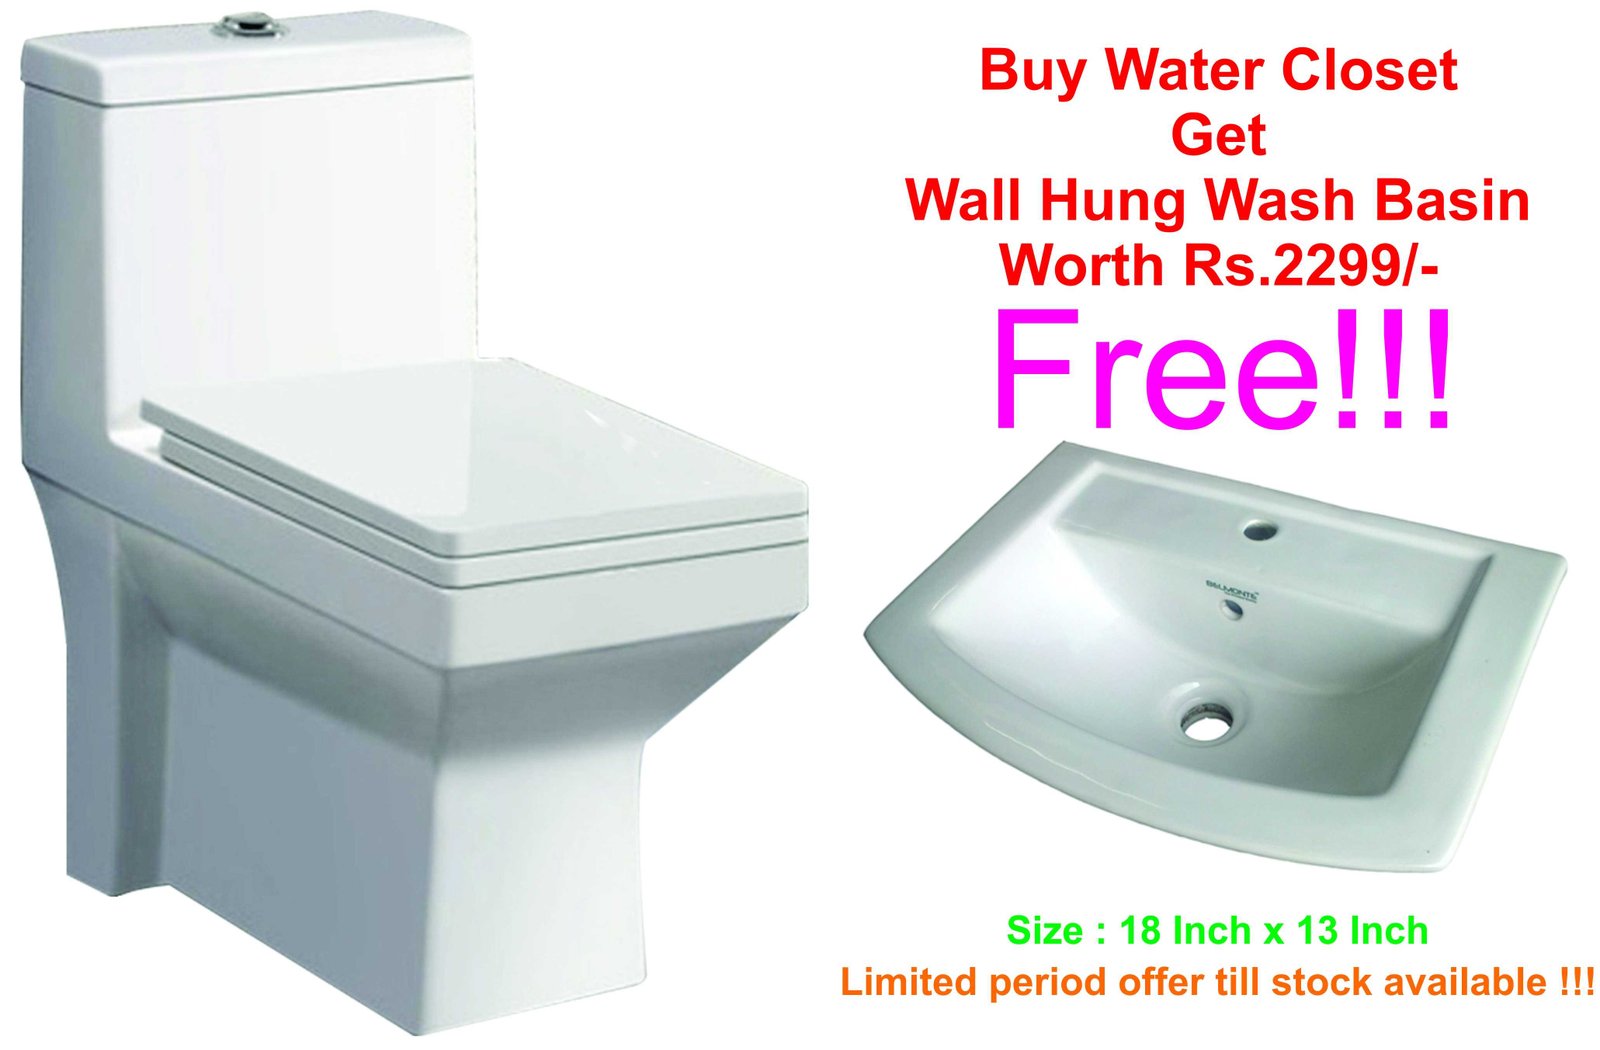 Buy Belmonte Water Closet Ripone S Trap With Wall Hung Basin Lily